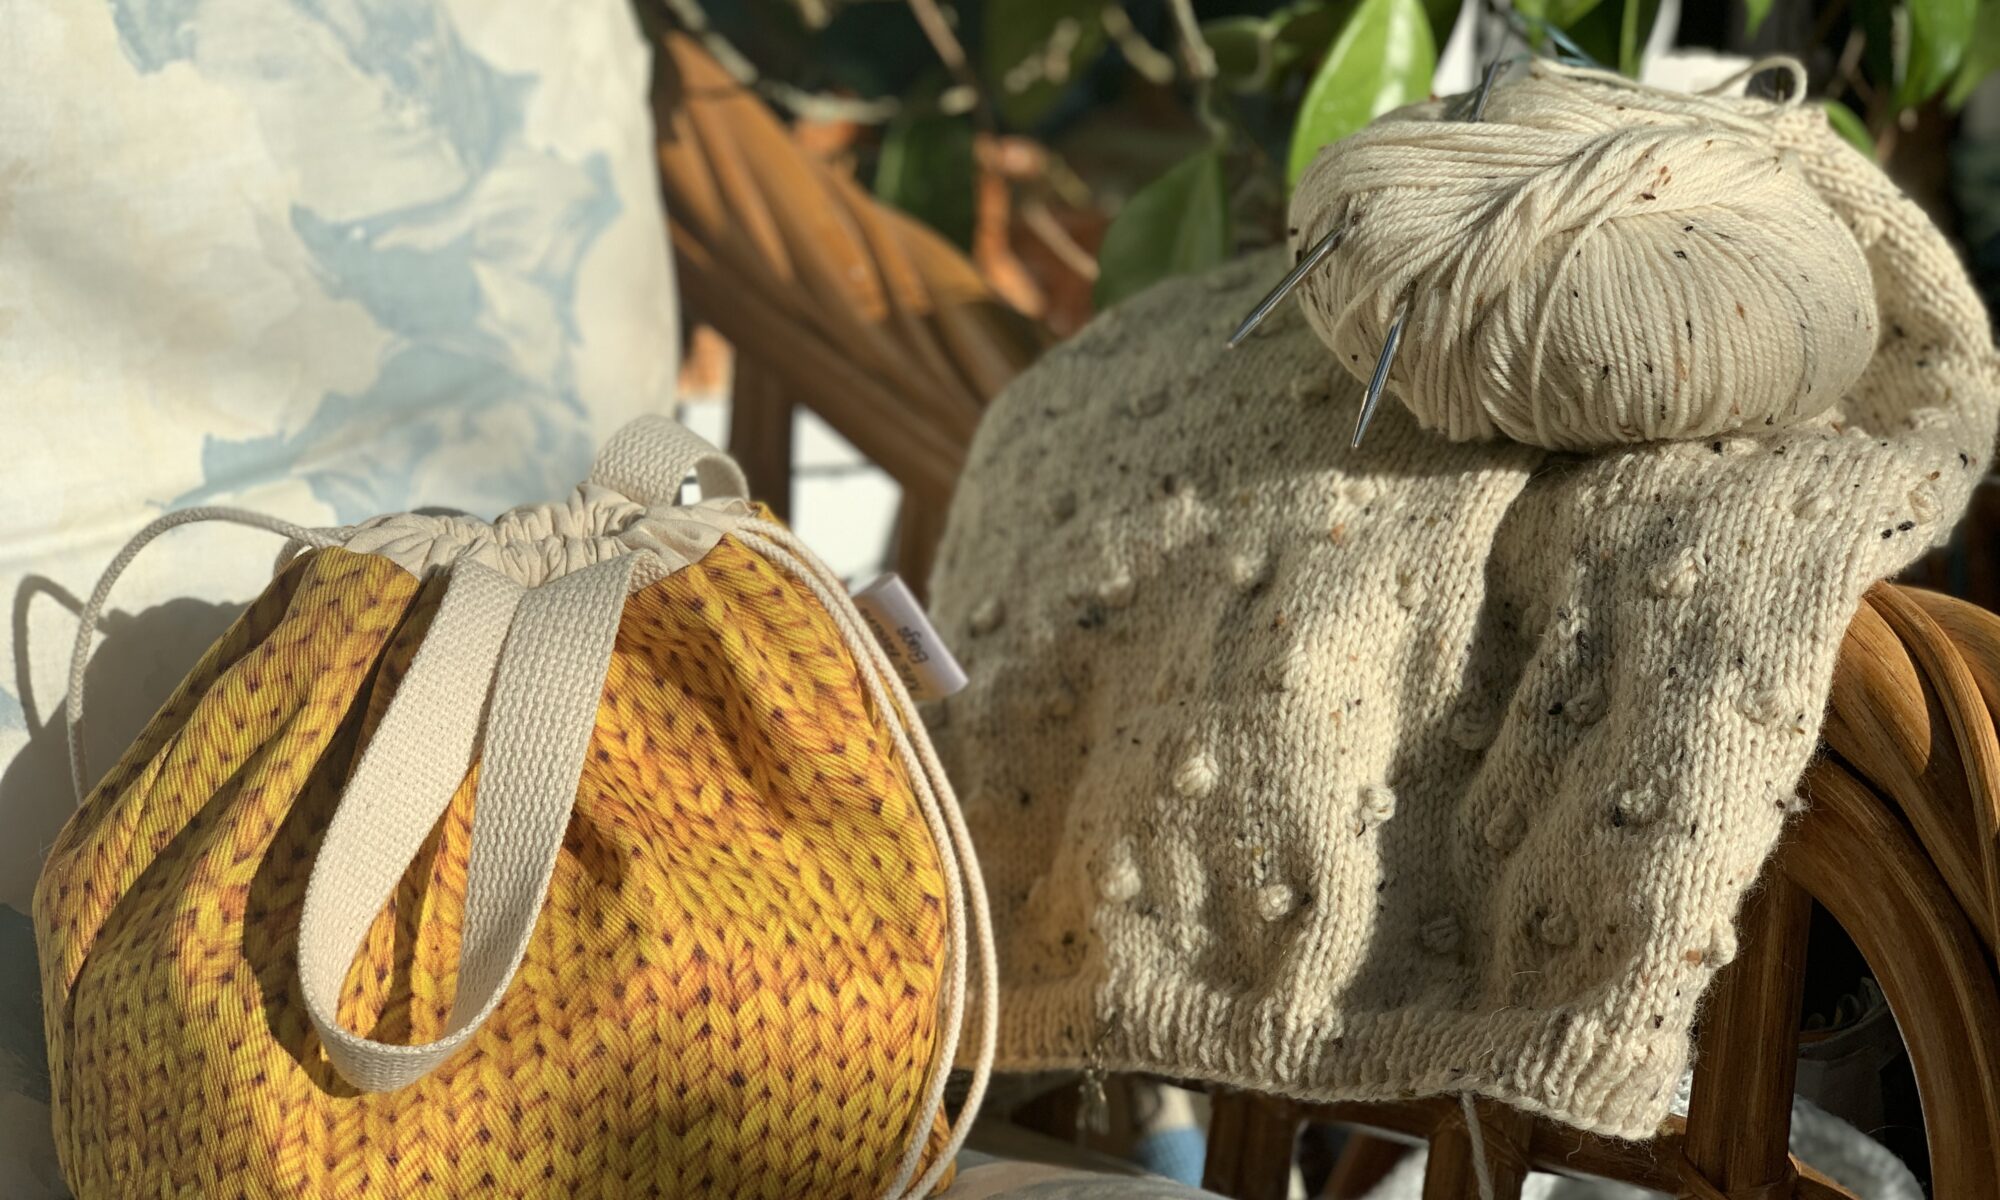 Image of a knitting bag and work of knitting on a chair